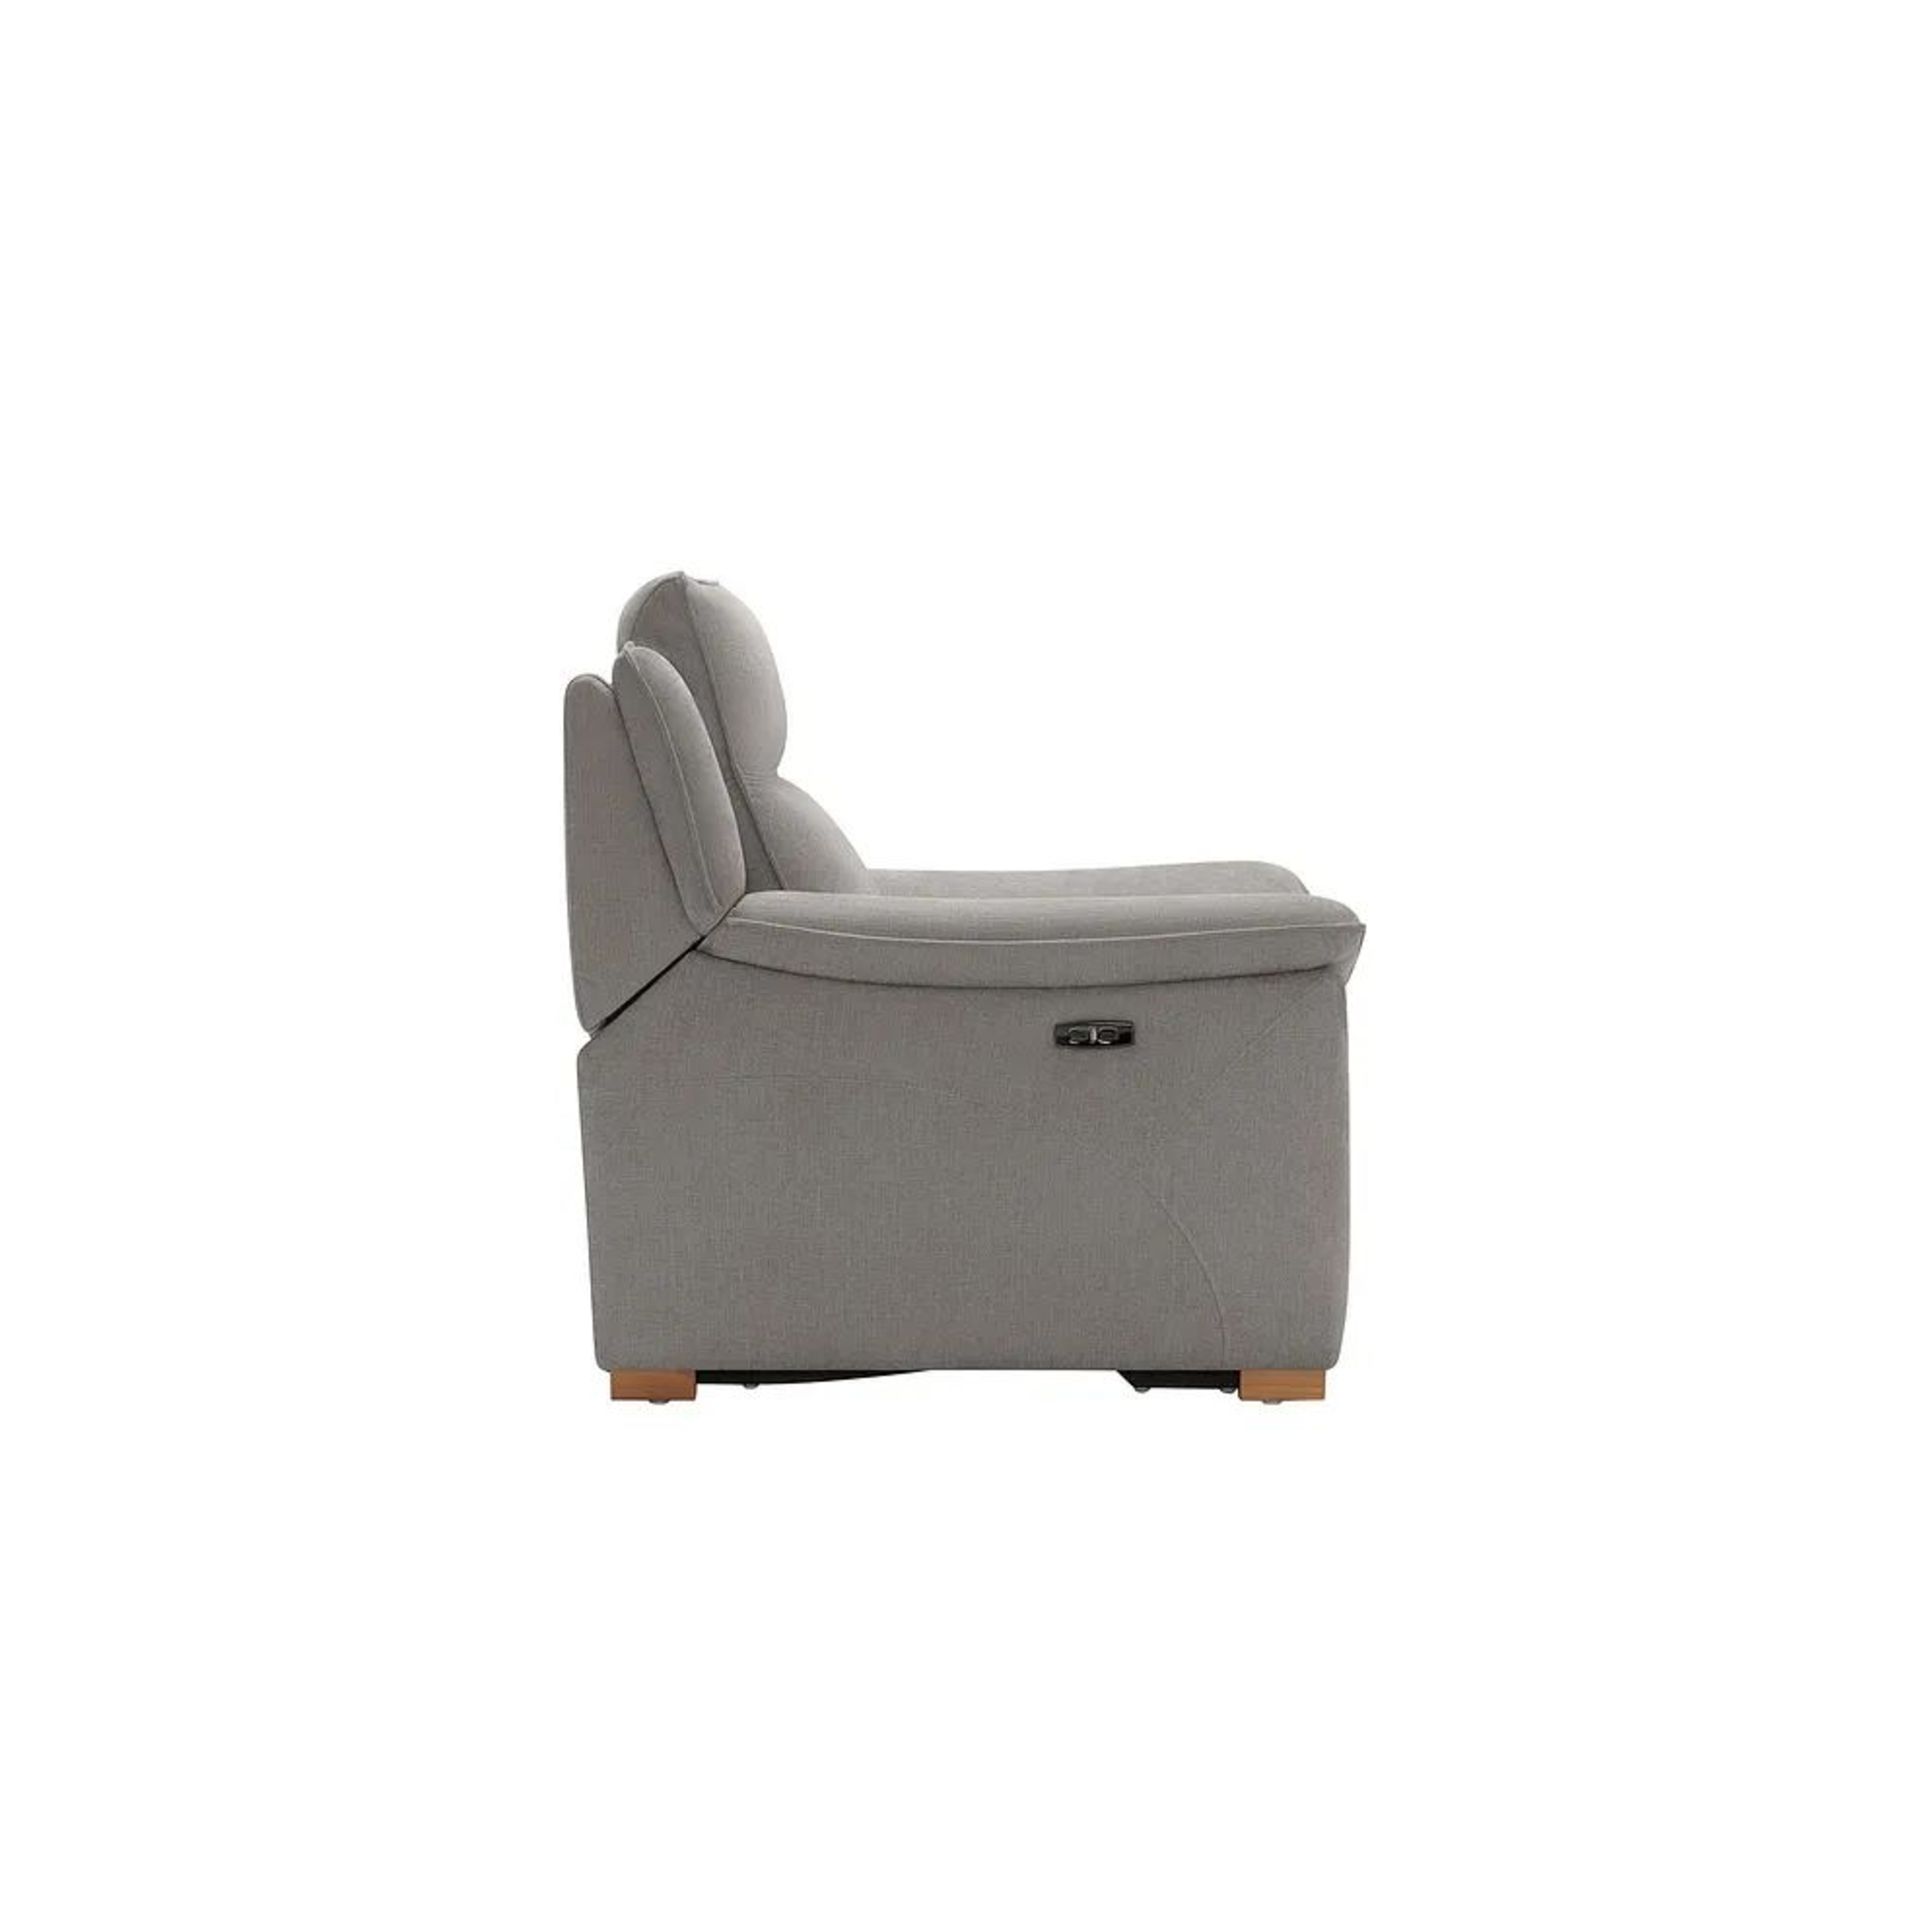 BRAND NEW DUNE Electric Recliner Armchair with Power Headrest - AMIGO GRANITE FABRIC. RRP £1099. - Image 8 of 12